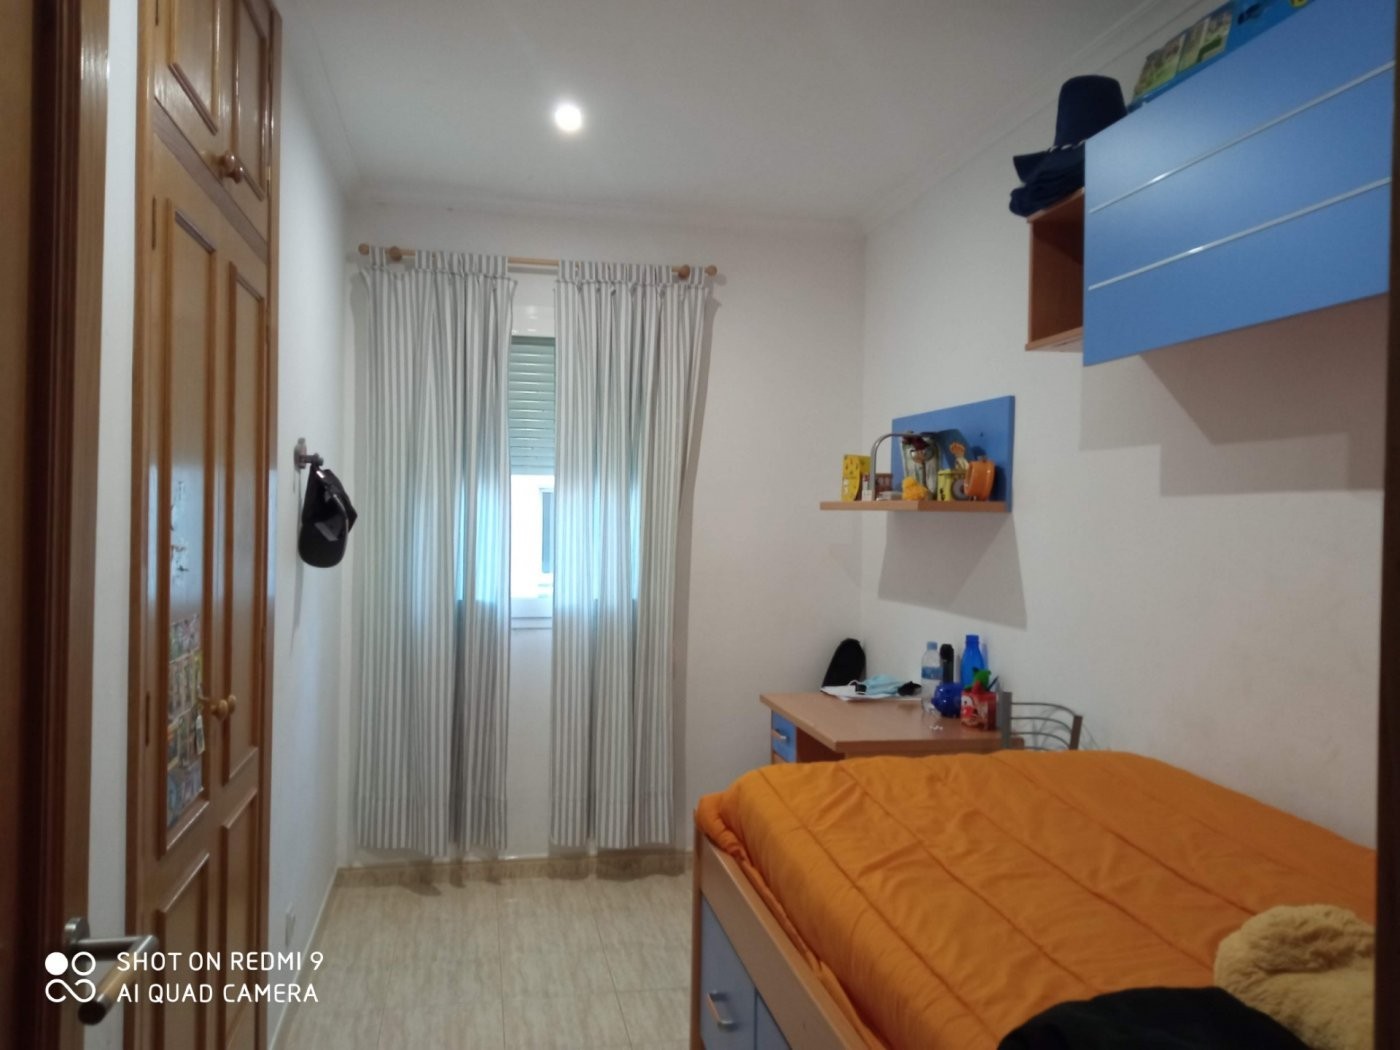 Apartment for sale in Menorca East 13